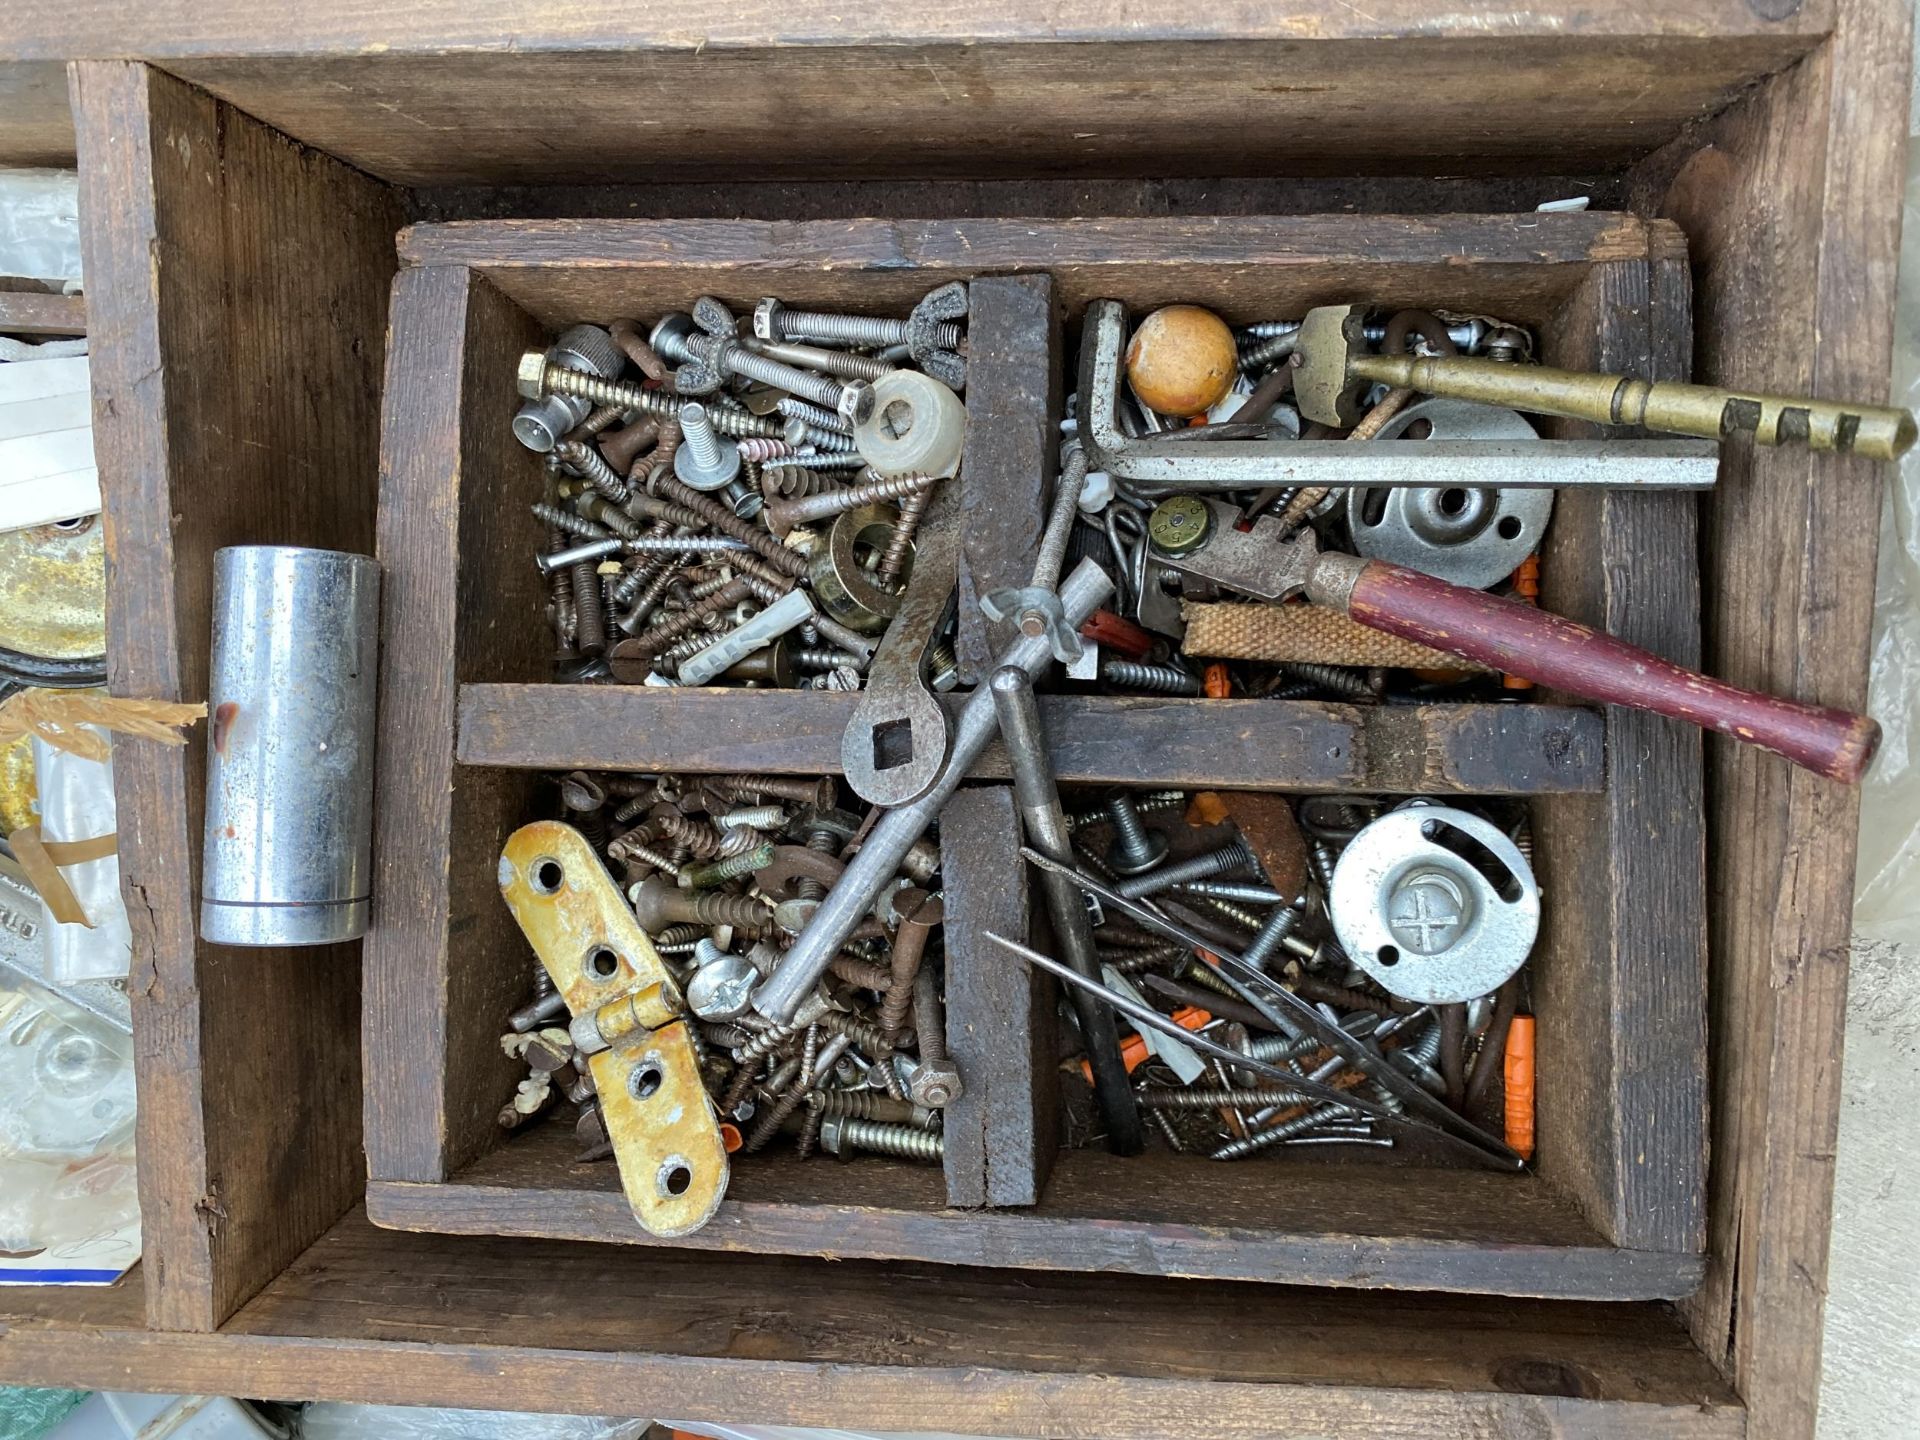 A LARGE VINTAGE ENGINEERS CHEST CONTAINING A LARGE ASSORTMENT OF TOOLS - Image 4 of 9